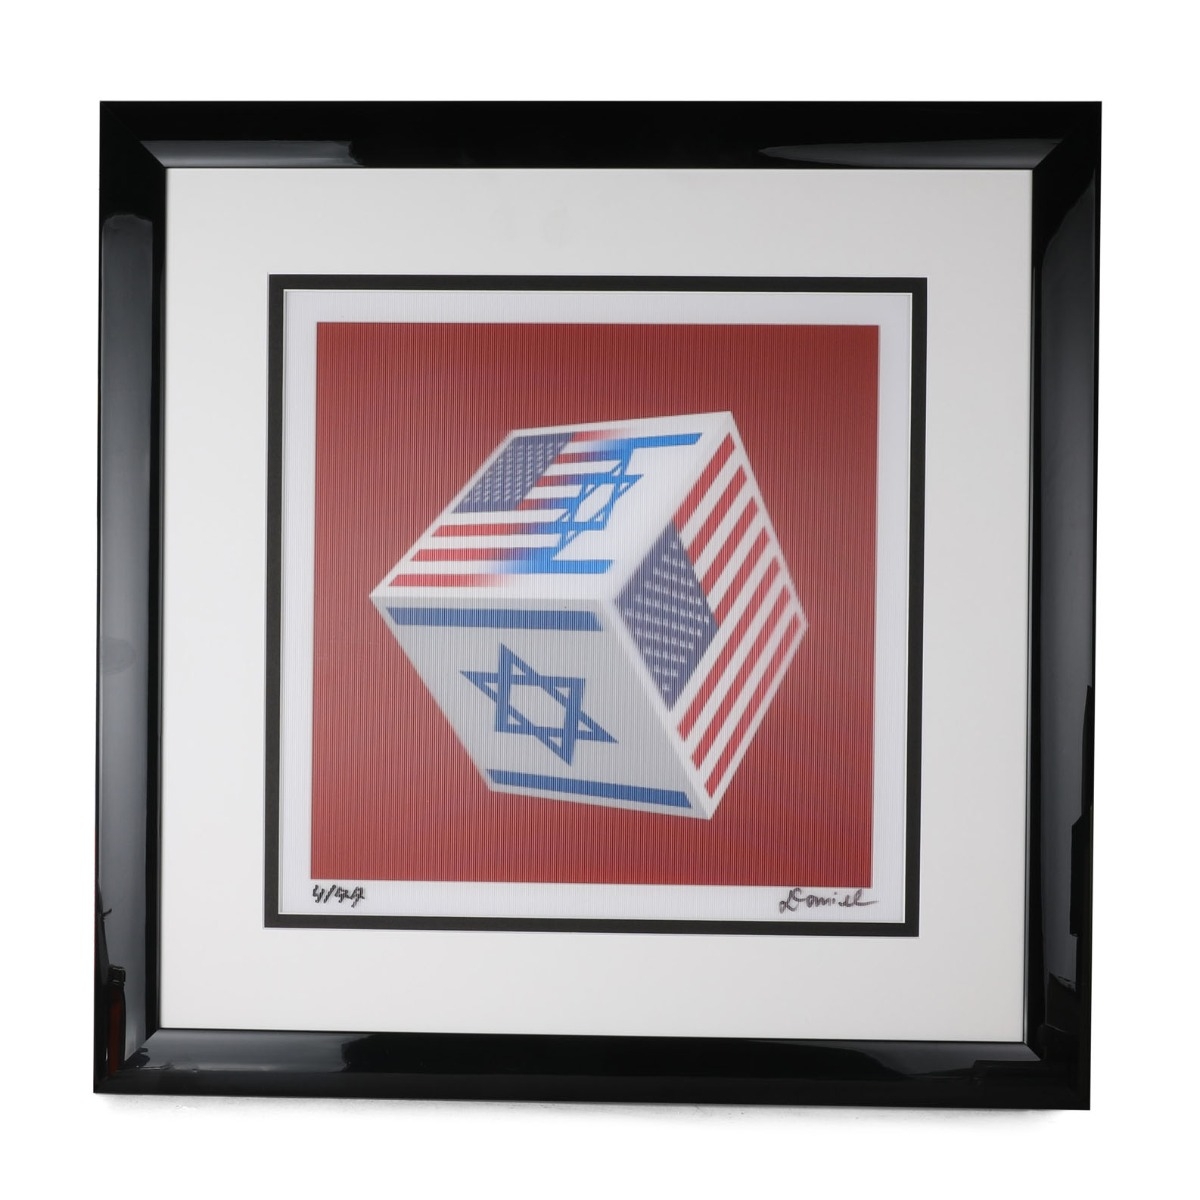 Limited Edition American-Israeli Friendship Framed 3D Optical Illusion Cube (Red Background, Black Frame) - 1